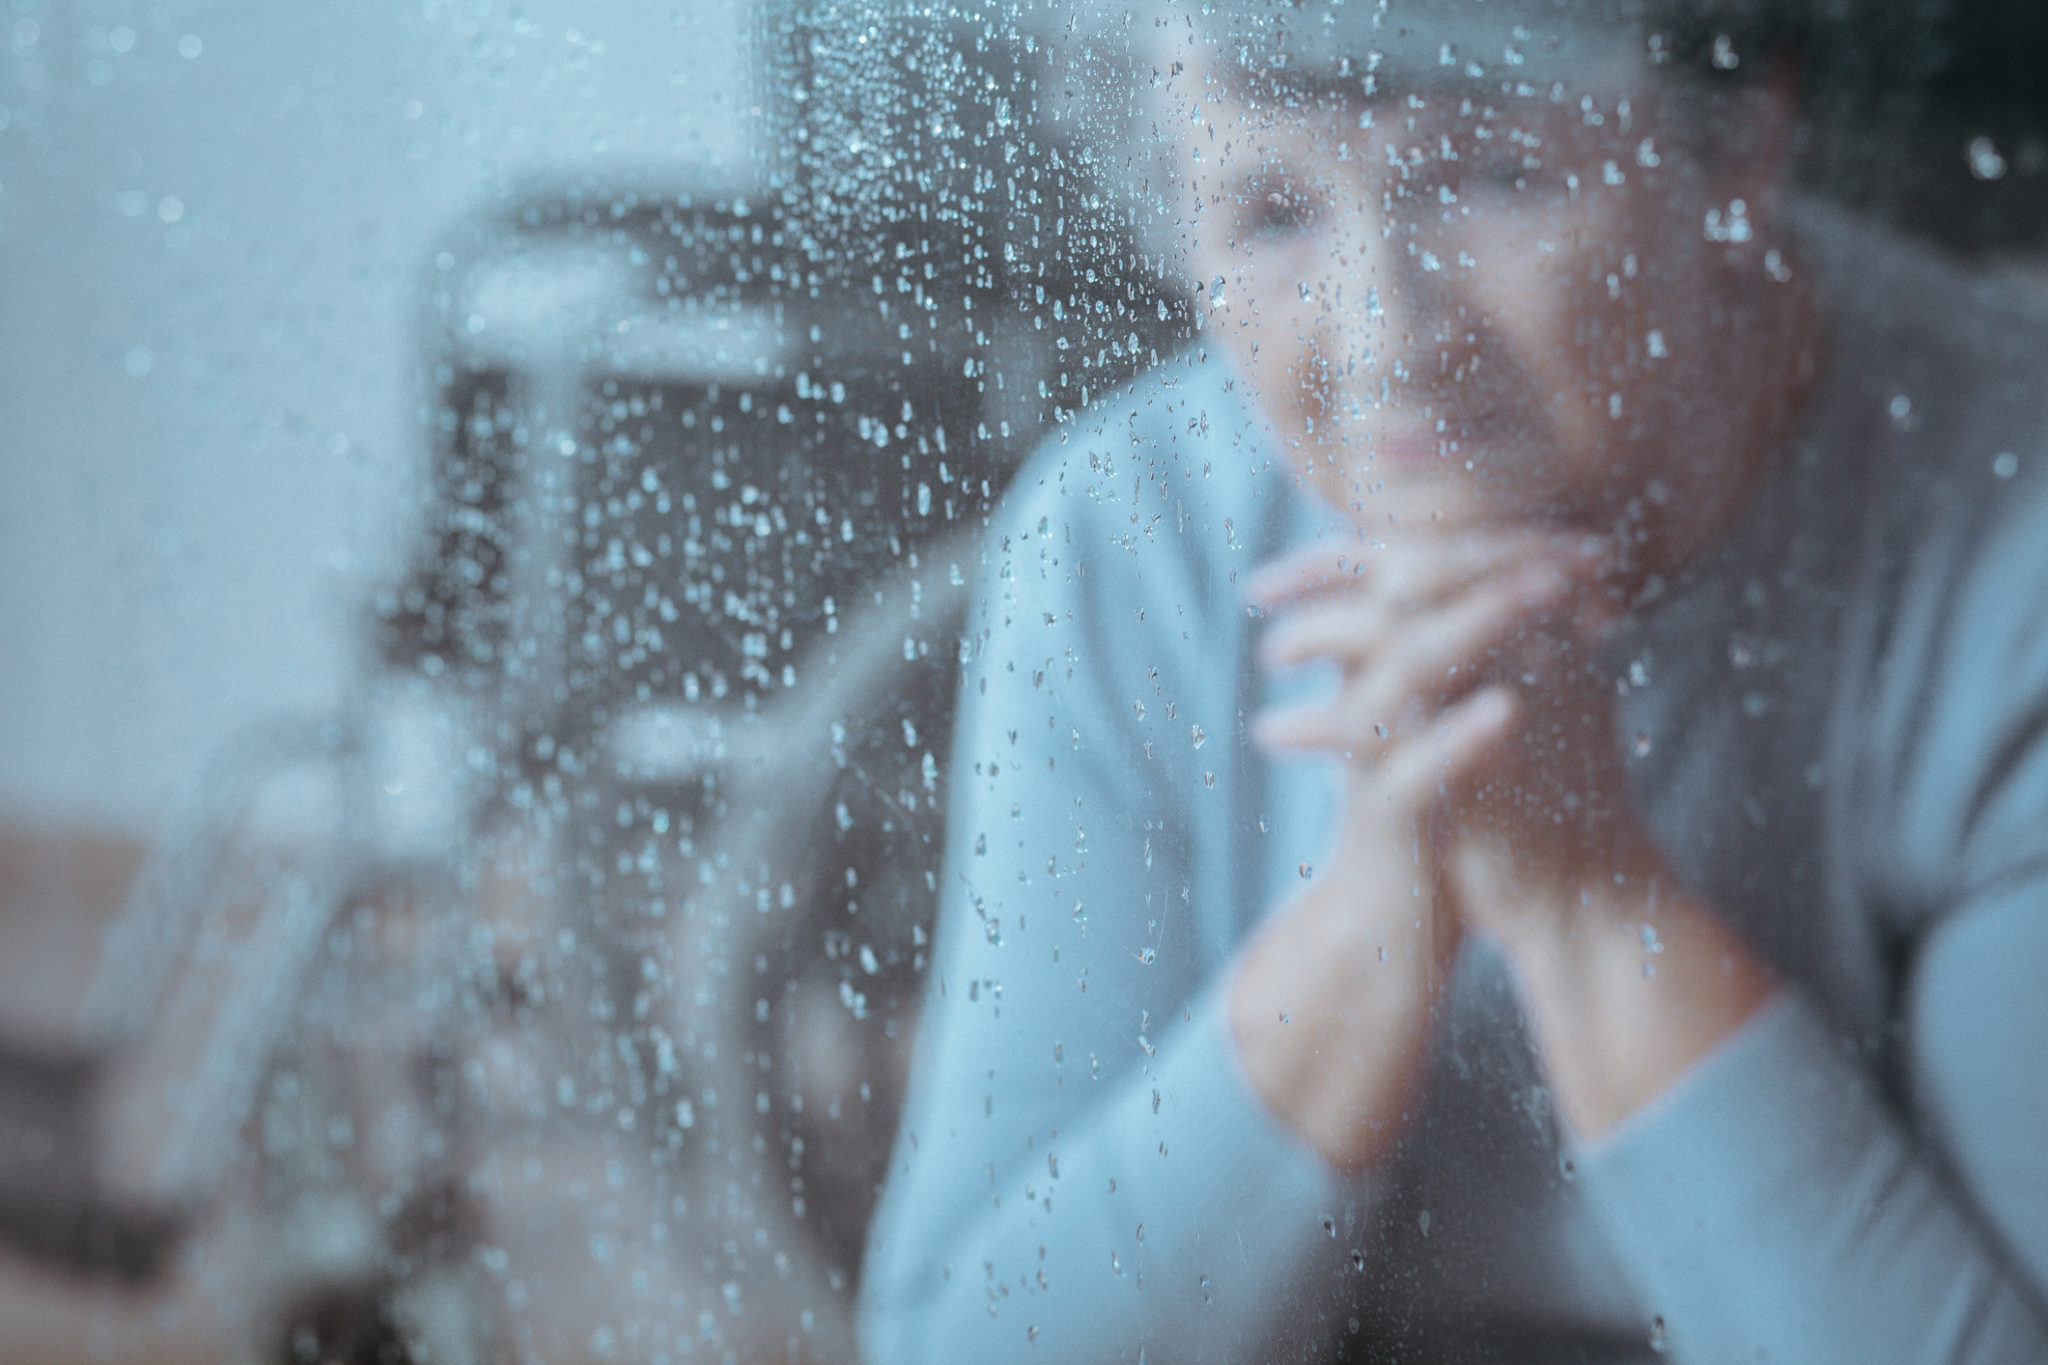 Elderly-woman-sitting-in-front-of-window-with-rainddrops 2125 x 1365